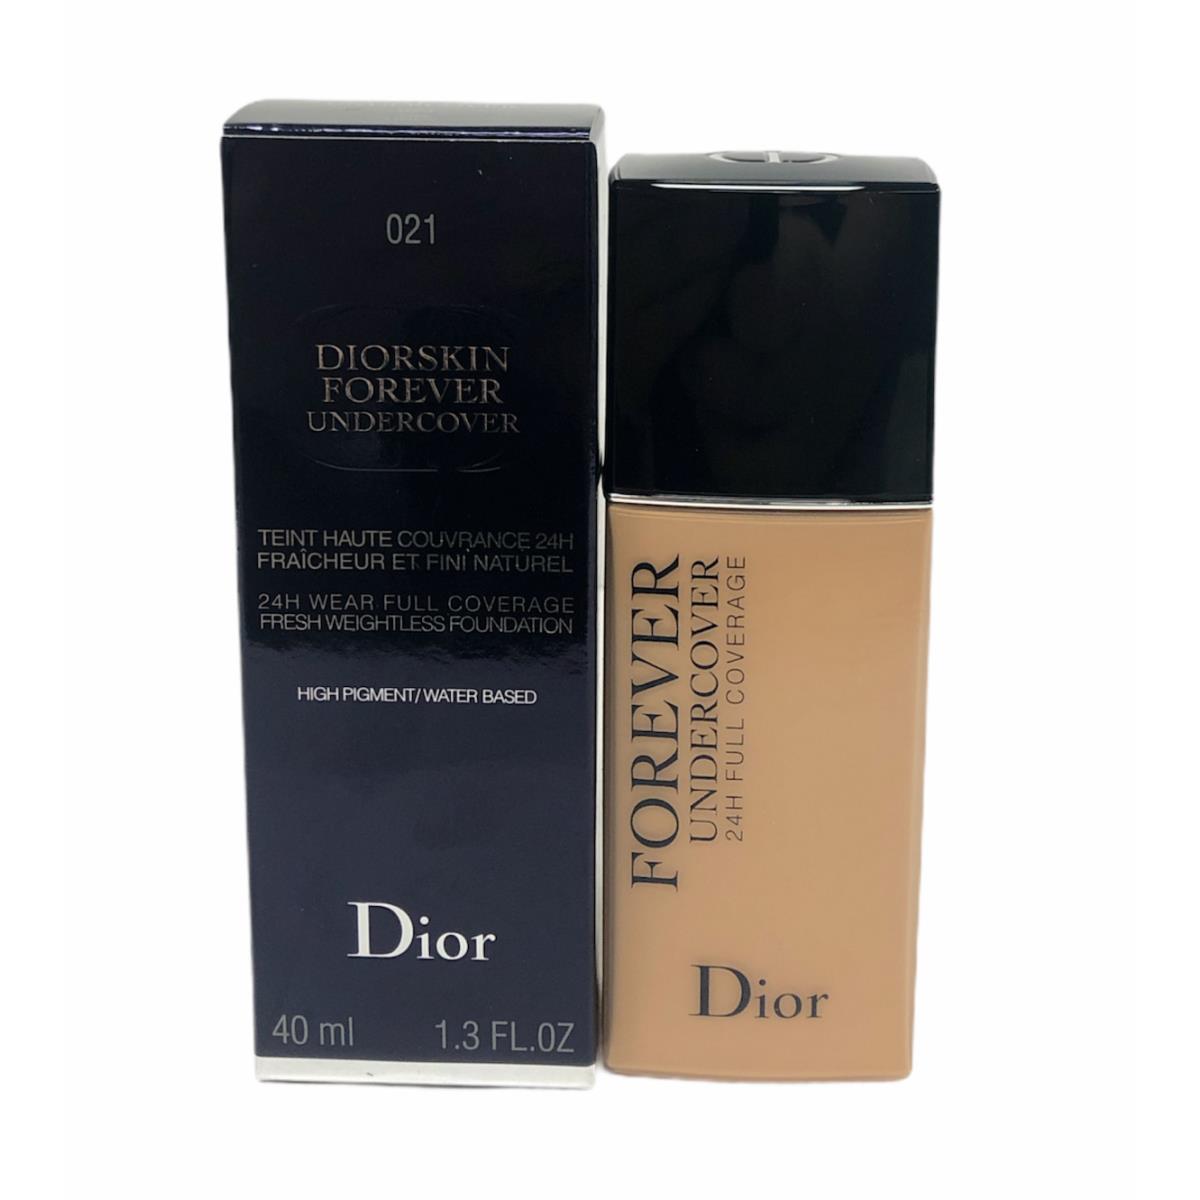 Diorskin Forever Undercover 24Hr Full Coverage Foundation 40mL/1.3Oz You Pick 021 LINEN